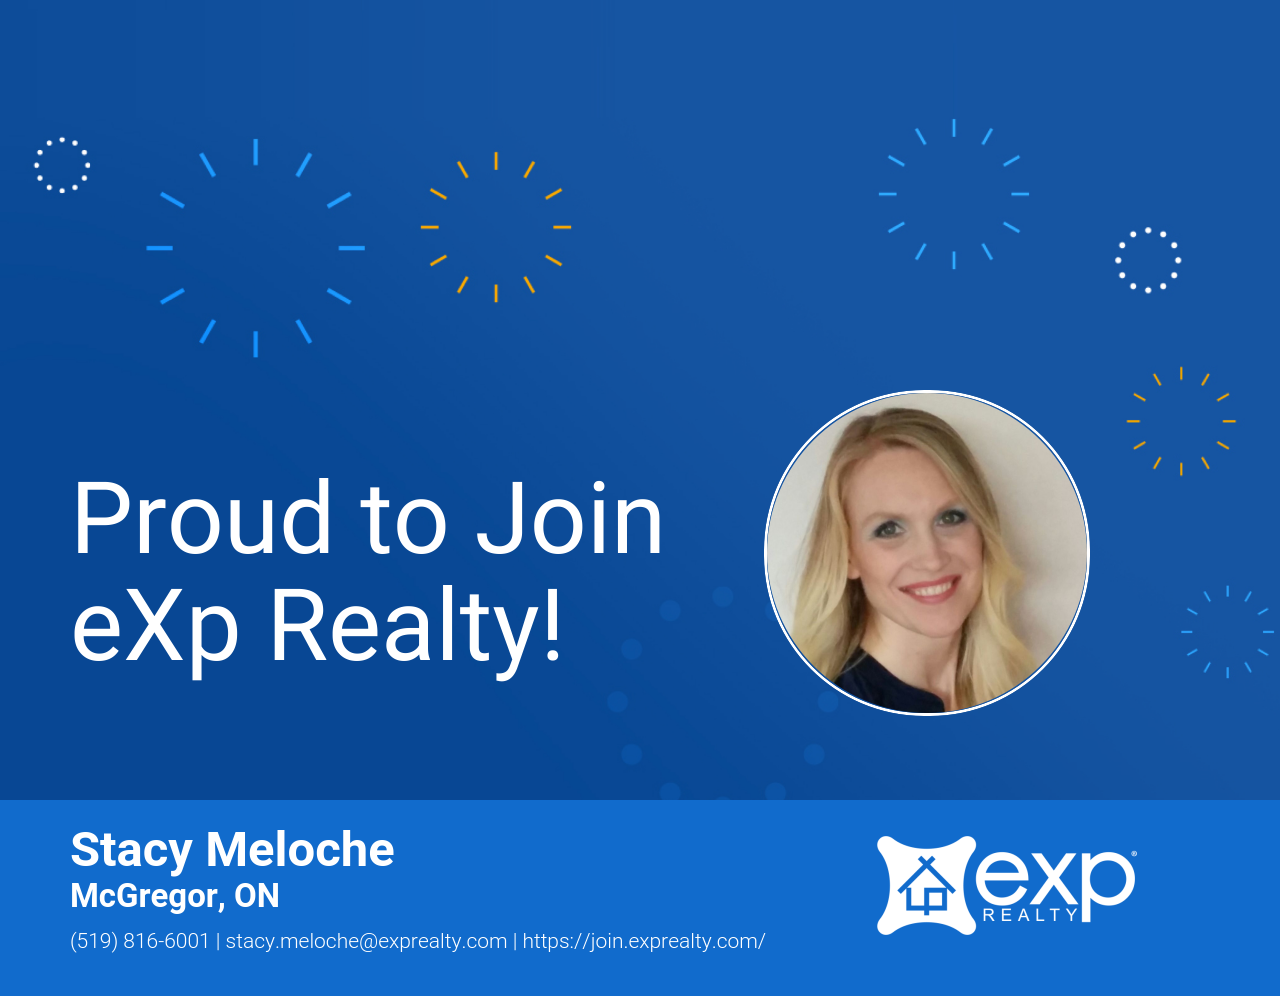 eXp Realty Welcomes Stacy Meloche!